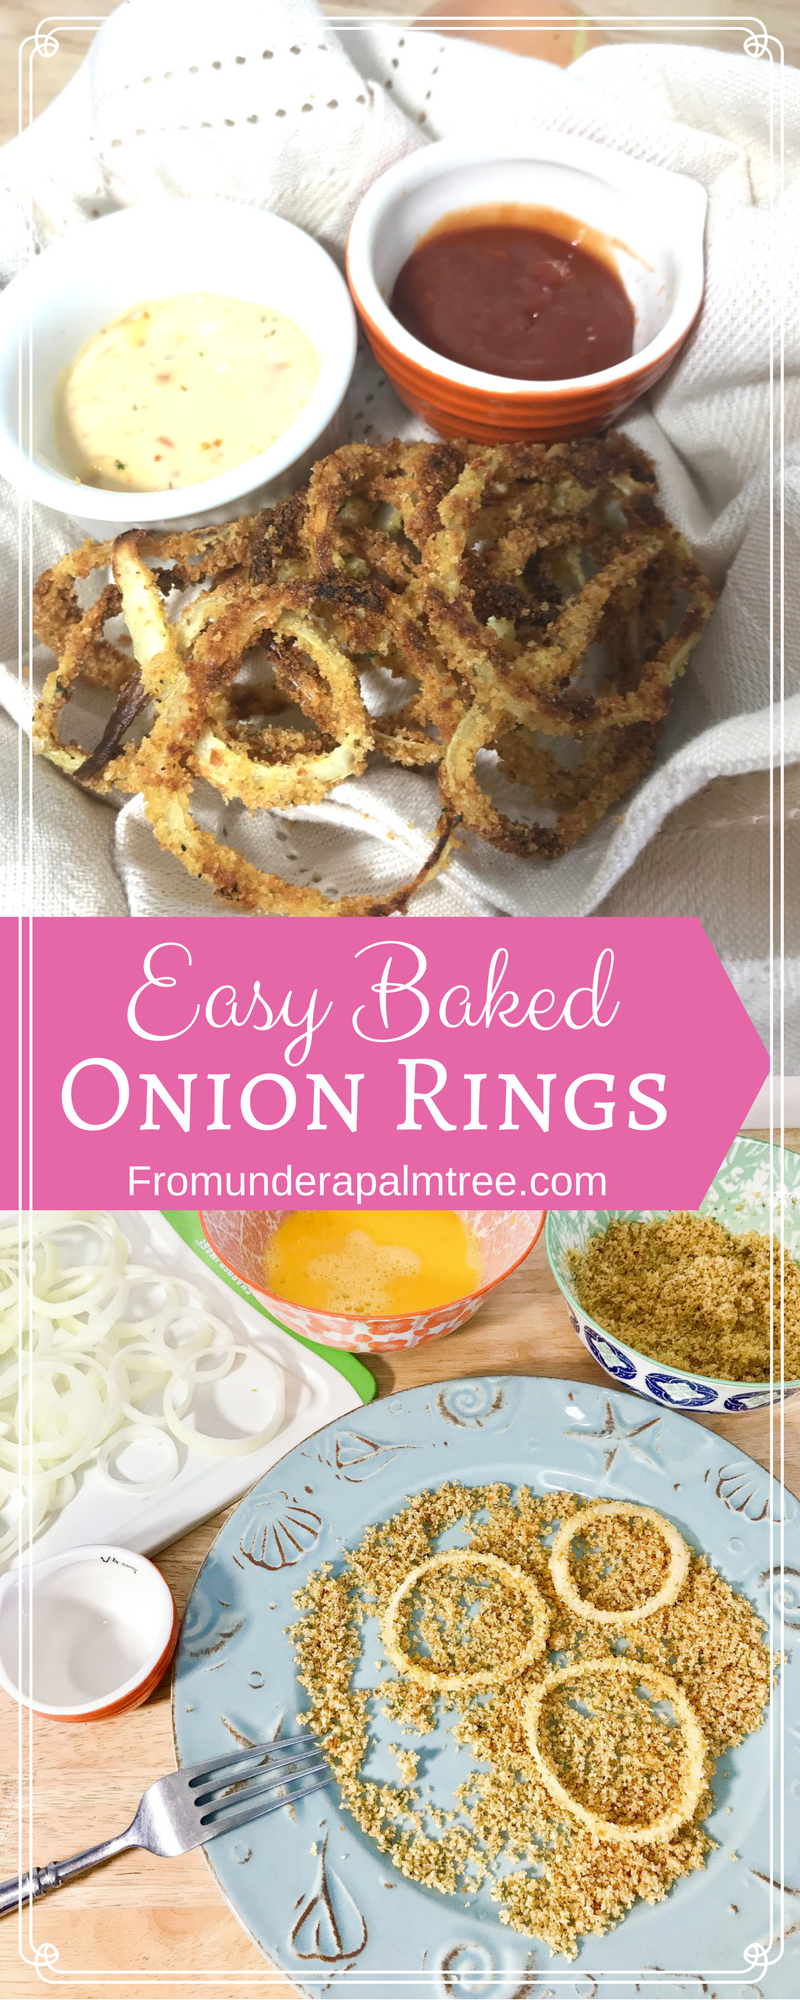 Easy Baked Onion Rings | Homemade | recipe | baked | easy | sauce | healthy | how to make | home | sweet onion | simple | 